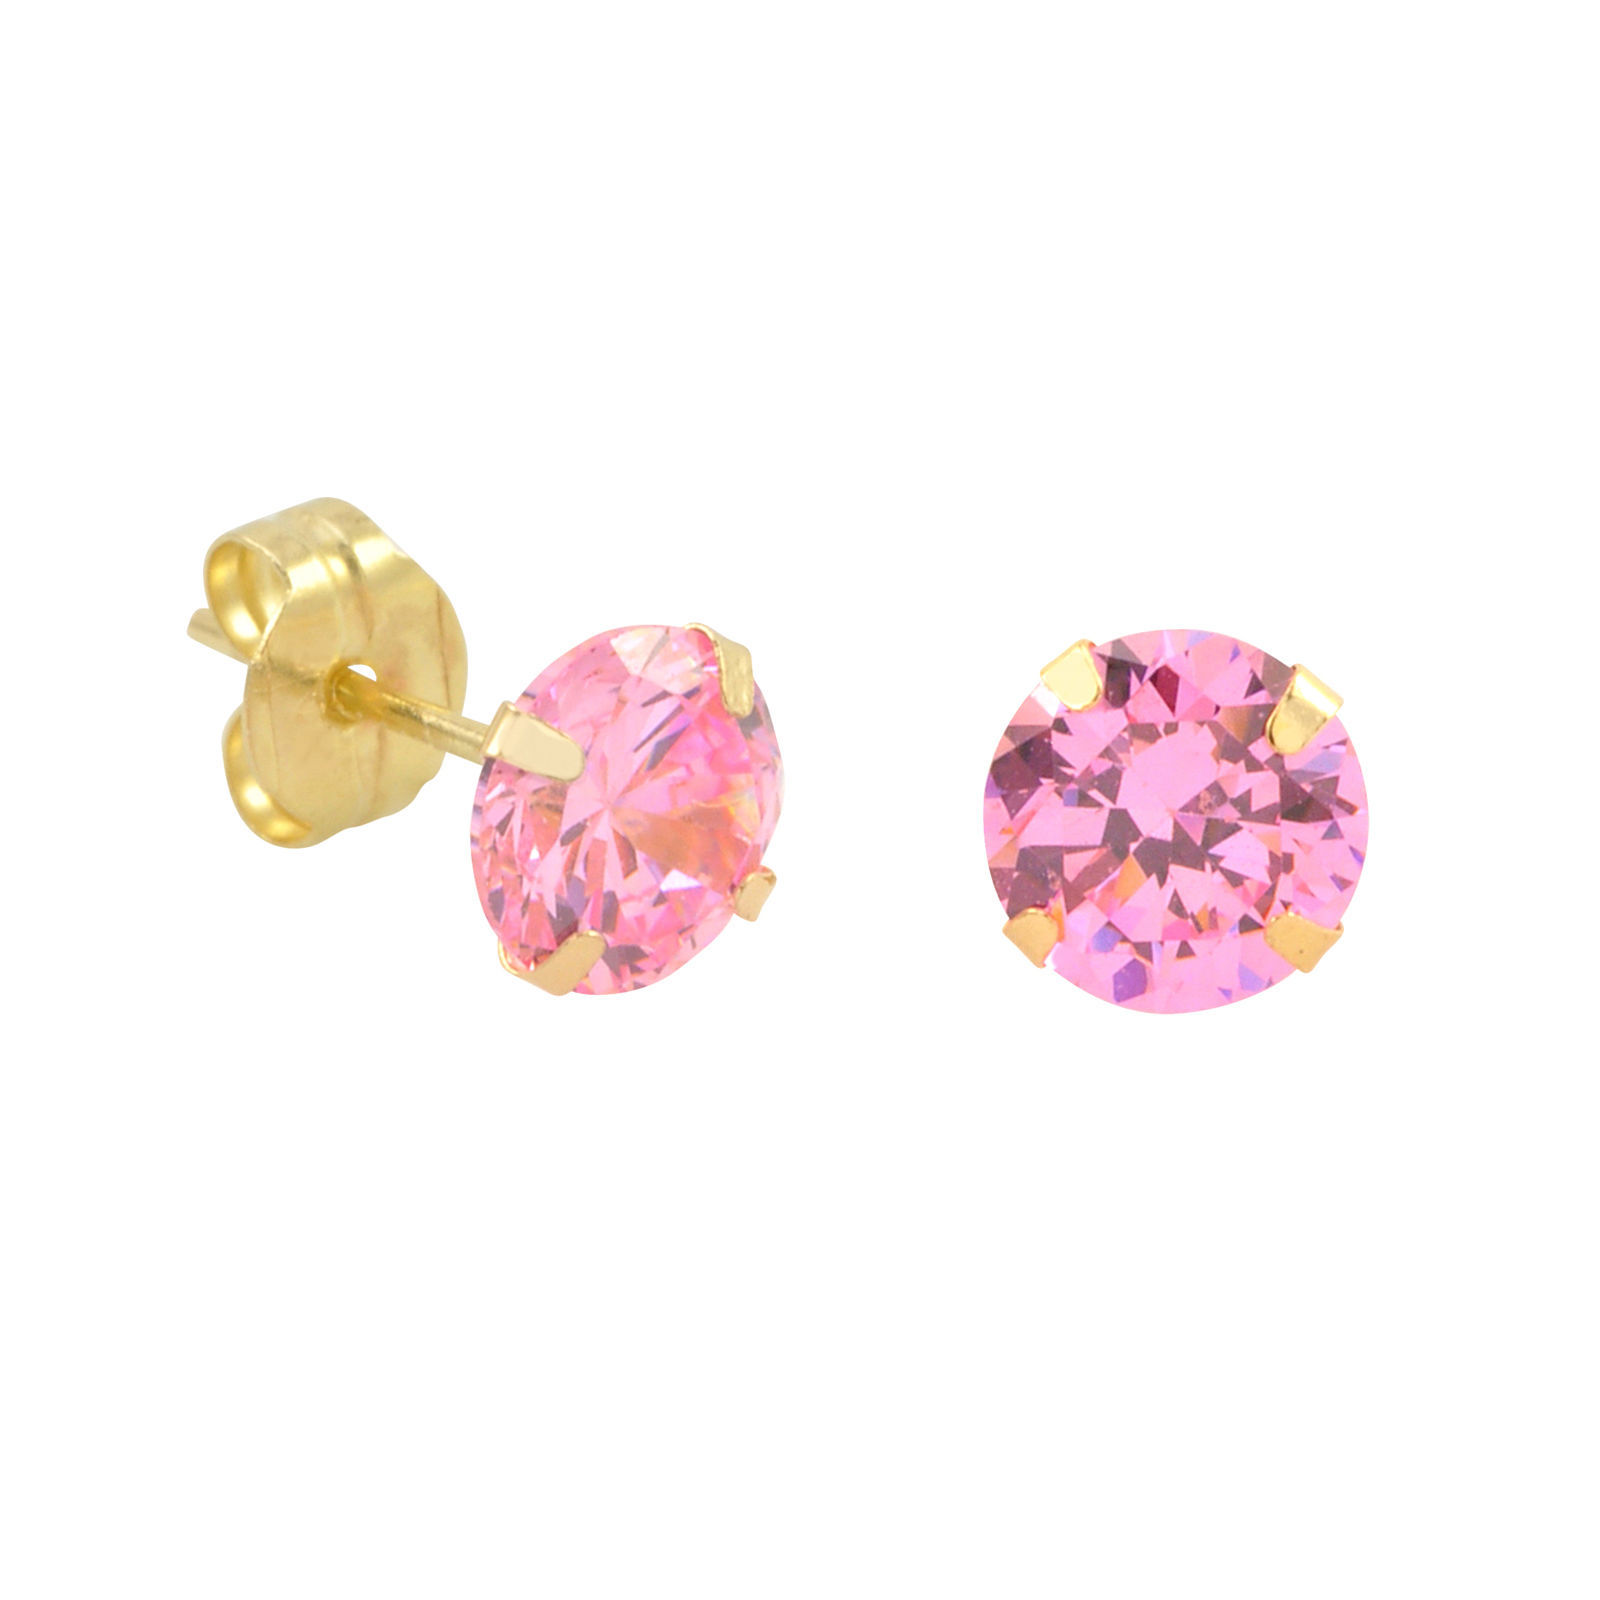 10k Yellow Gold Stud Earrings Pink CZ Cubic Zirconia Round Prong Set